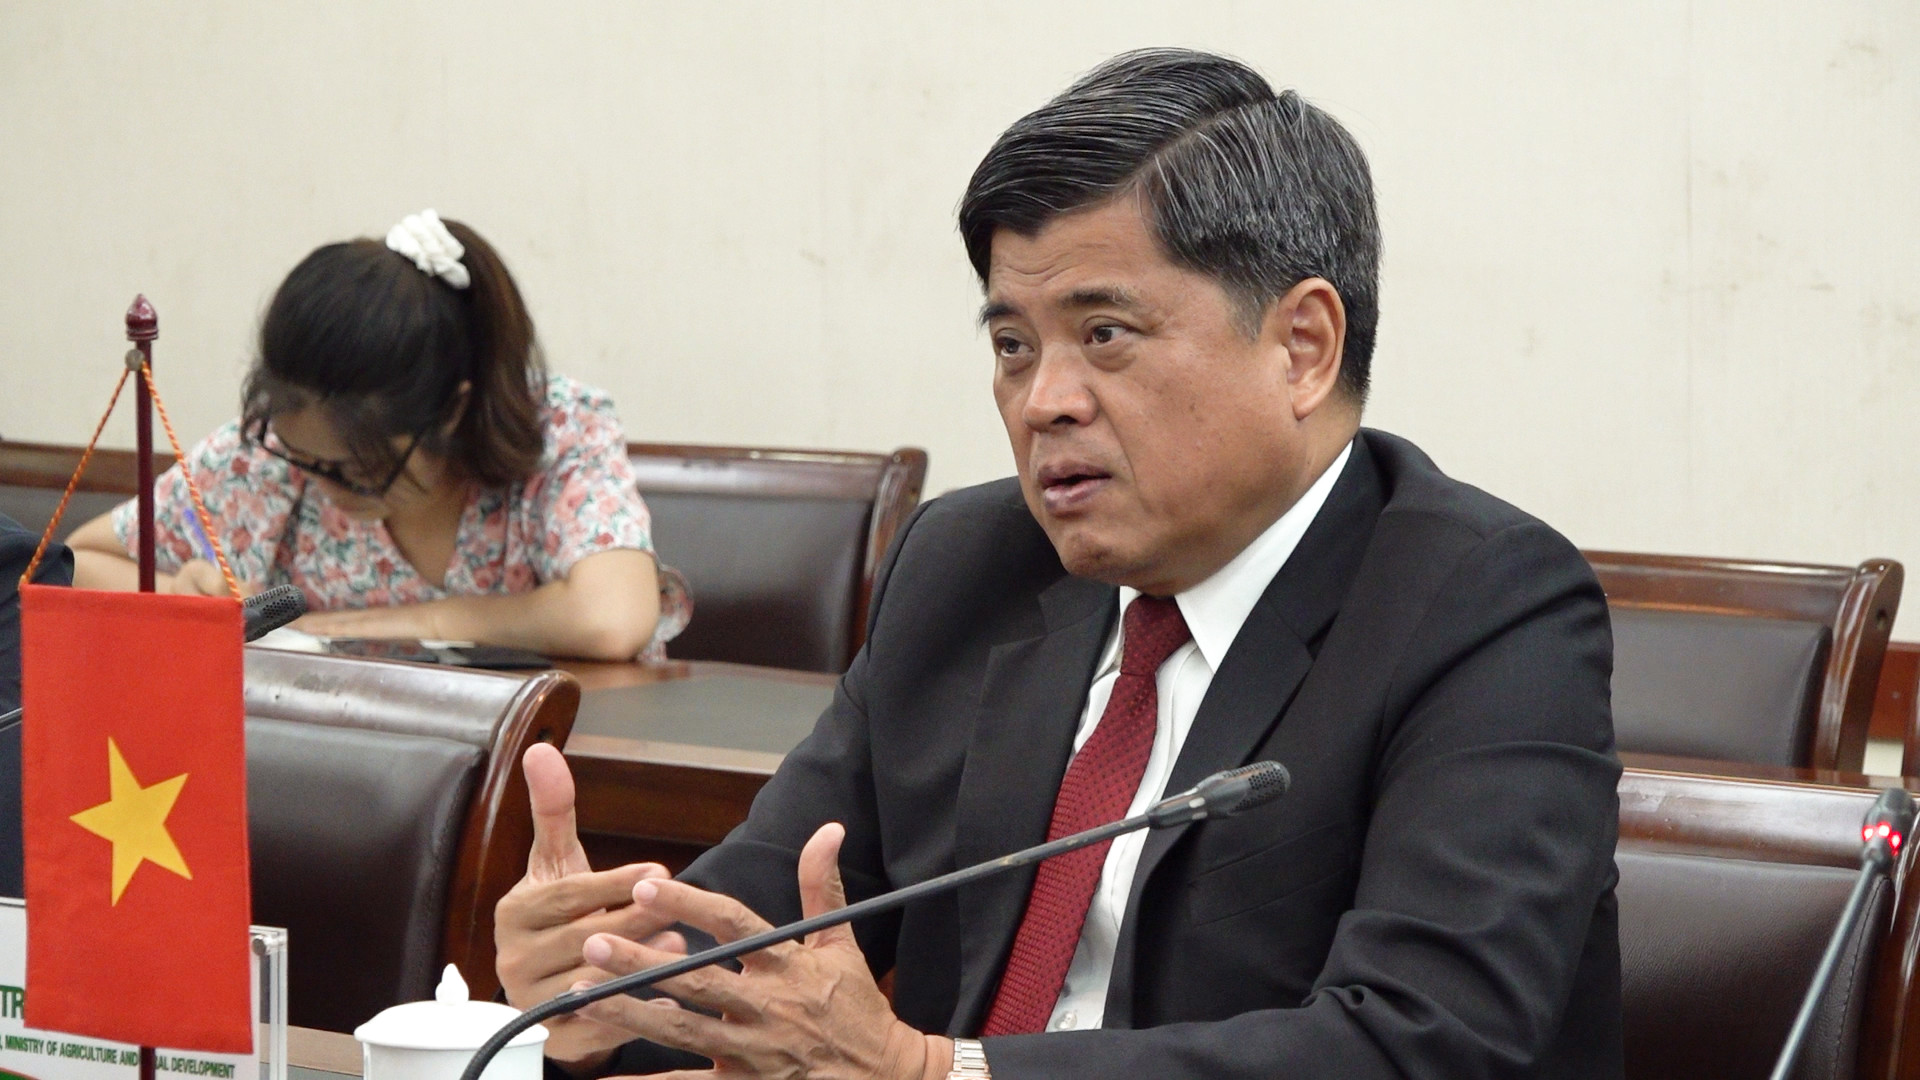 According to Deputy Minister Tran Thanh Nam, Vietnam will implement a high-quality agricultural human resource training program that draws experience from the Japanese model. Photo: Thanh Thuy.